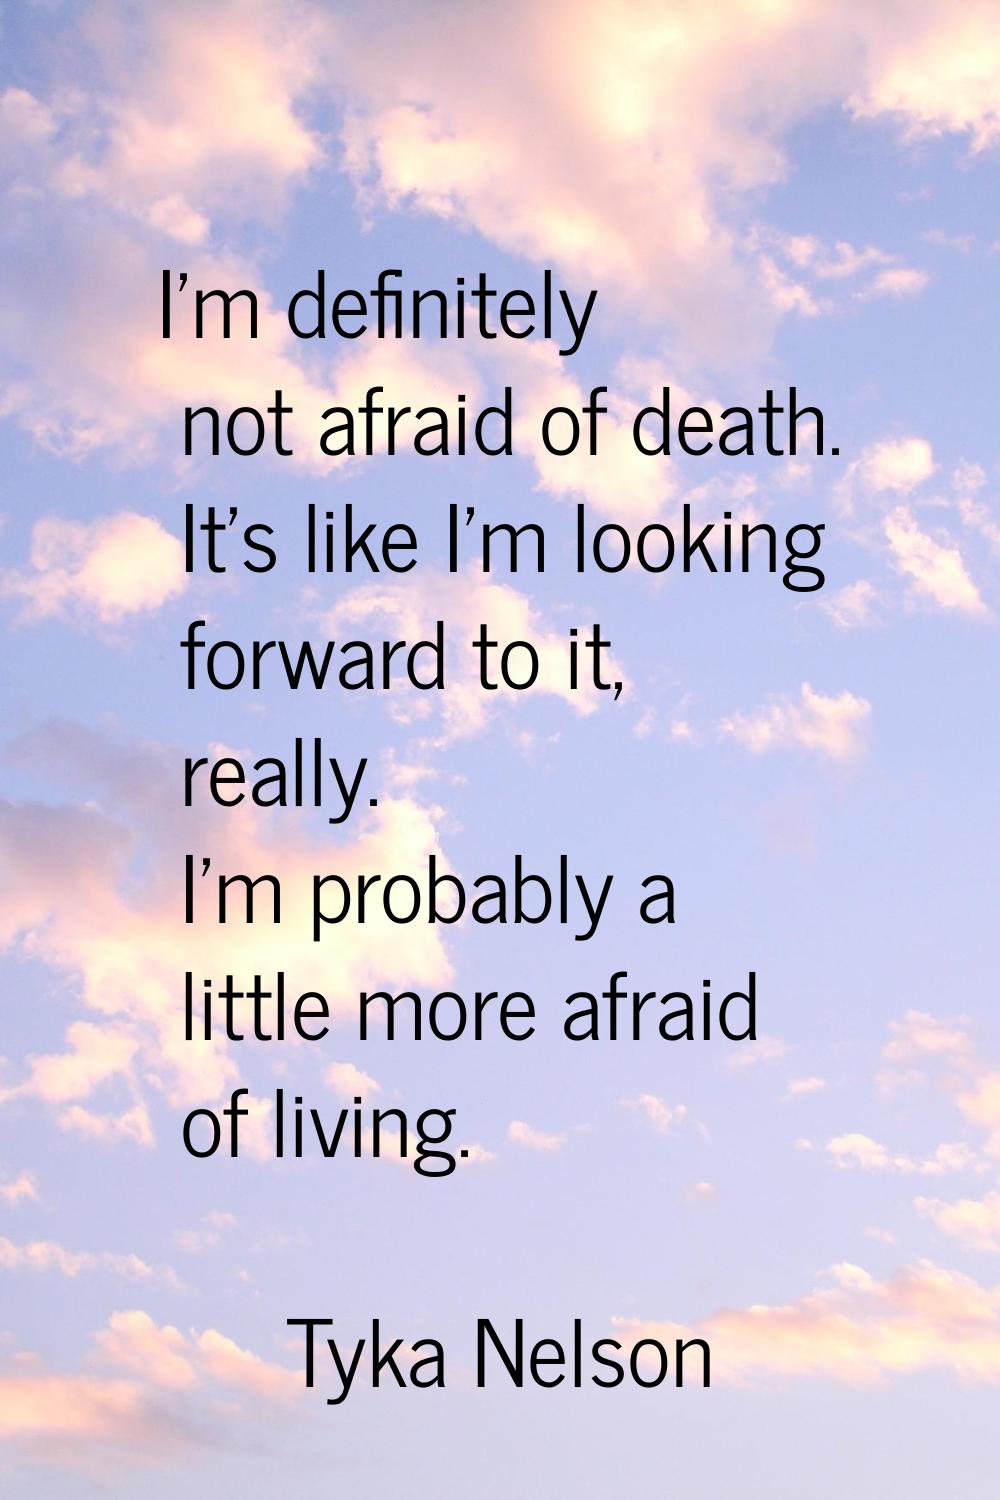 I'm definitely not afraid of death. It's like I'm looking forward to it, really. I'm probably a lit